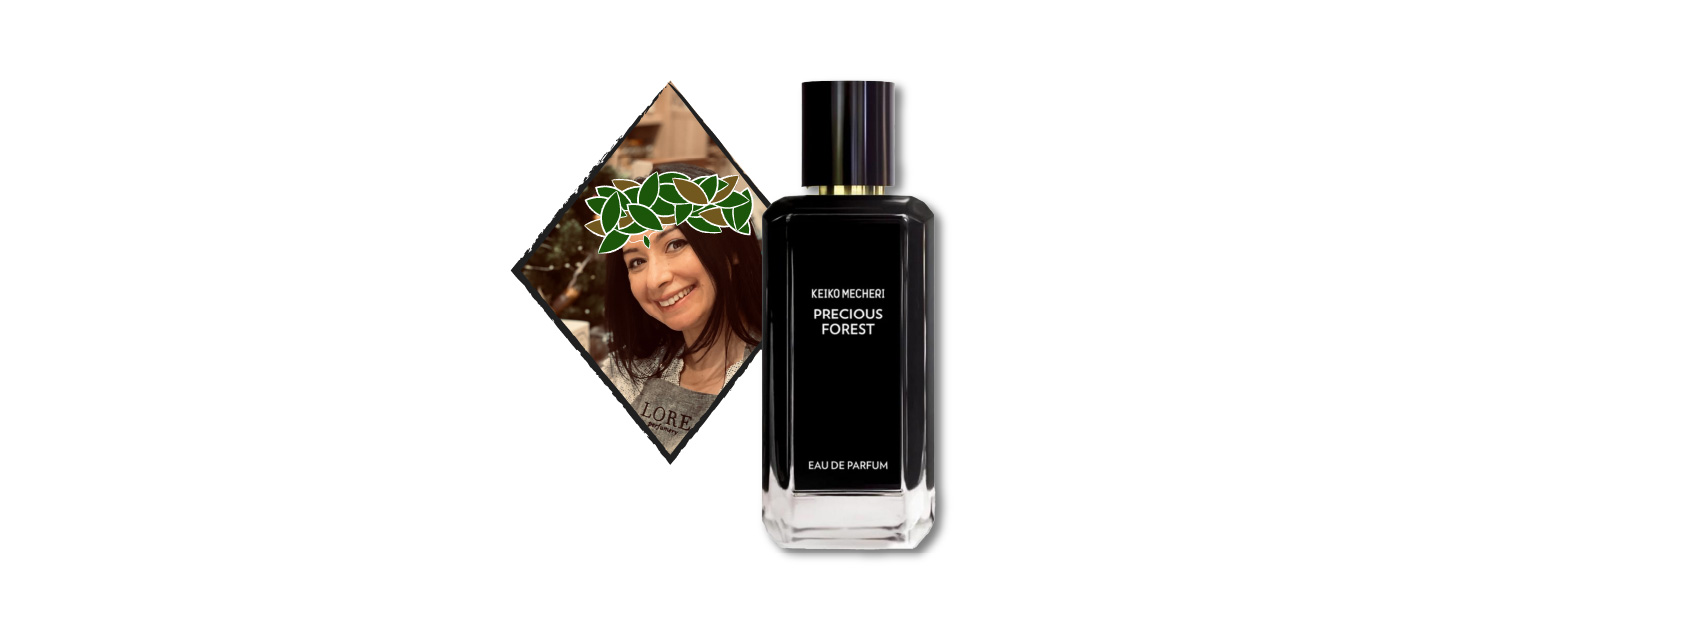 bottle of precious forest by keiko mecheri and sonia from the lore team as a forest witch